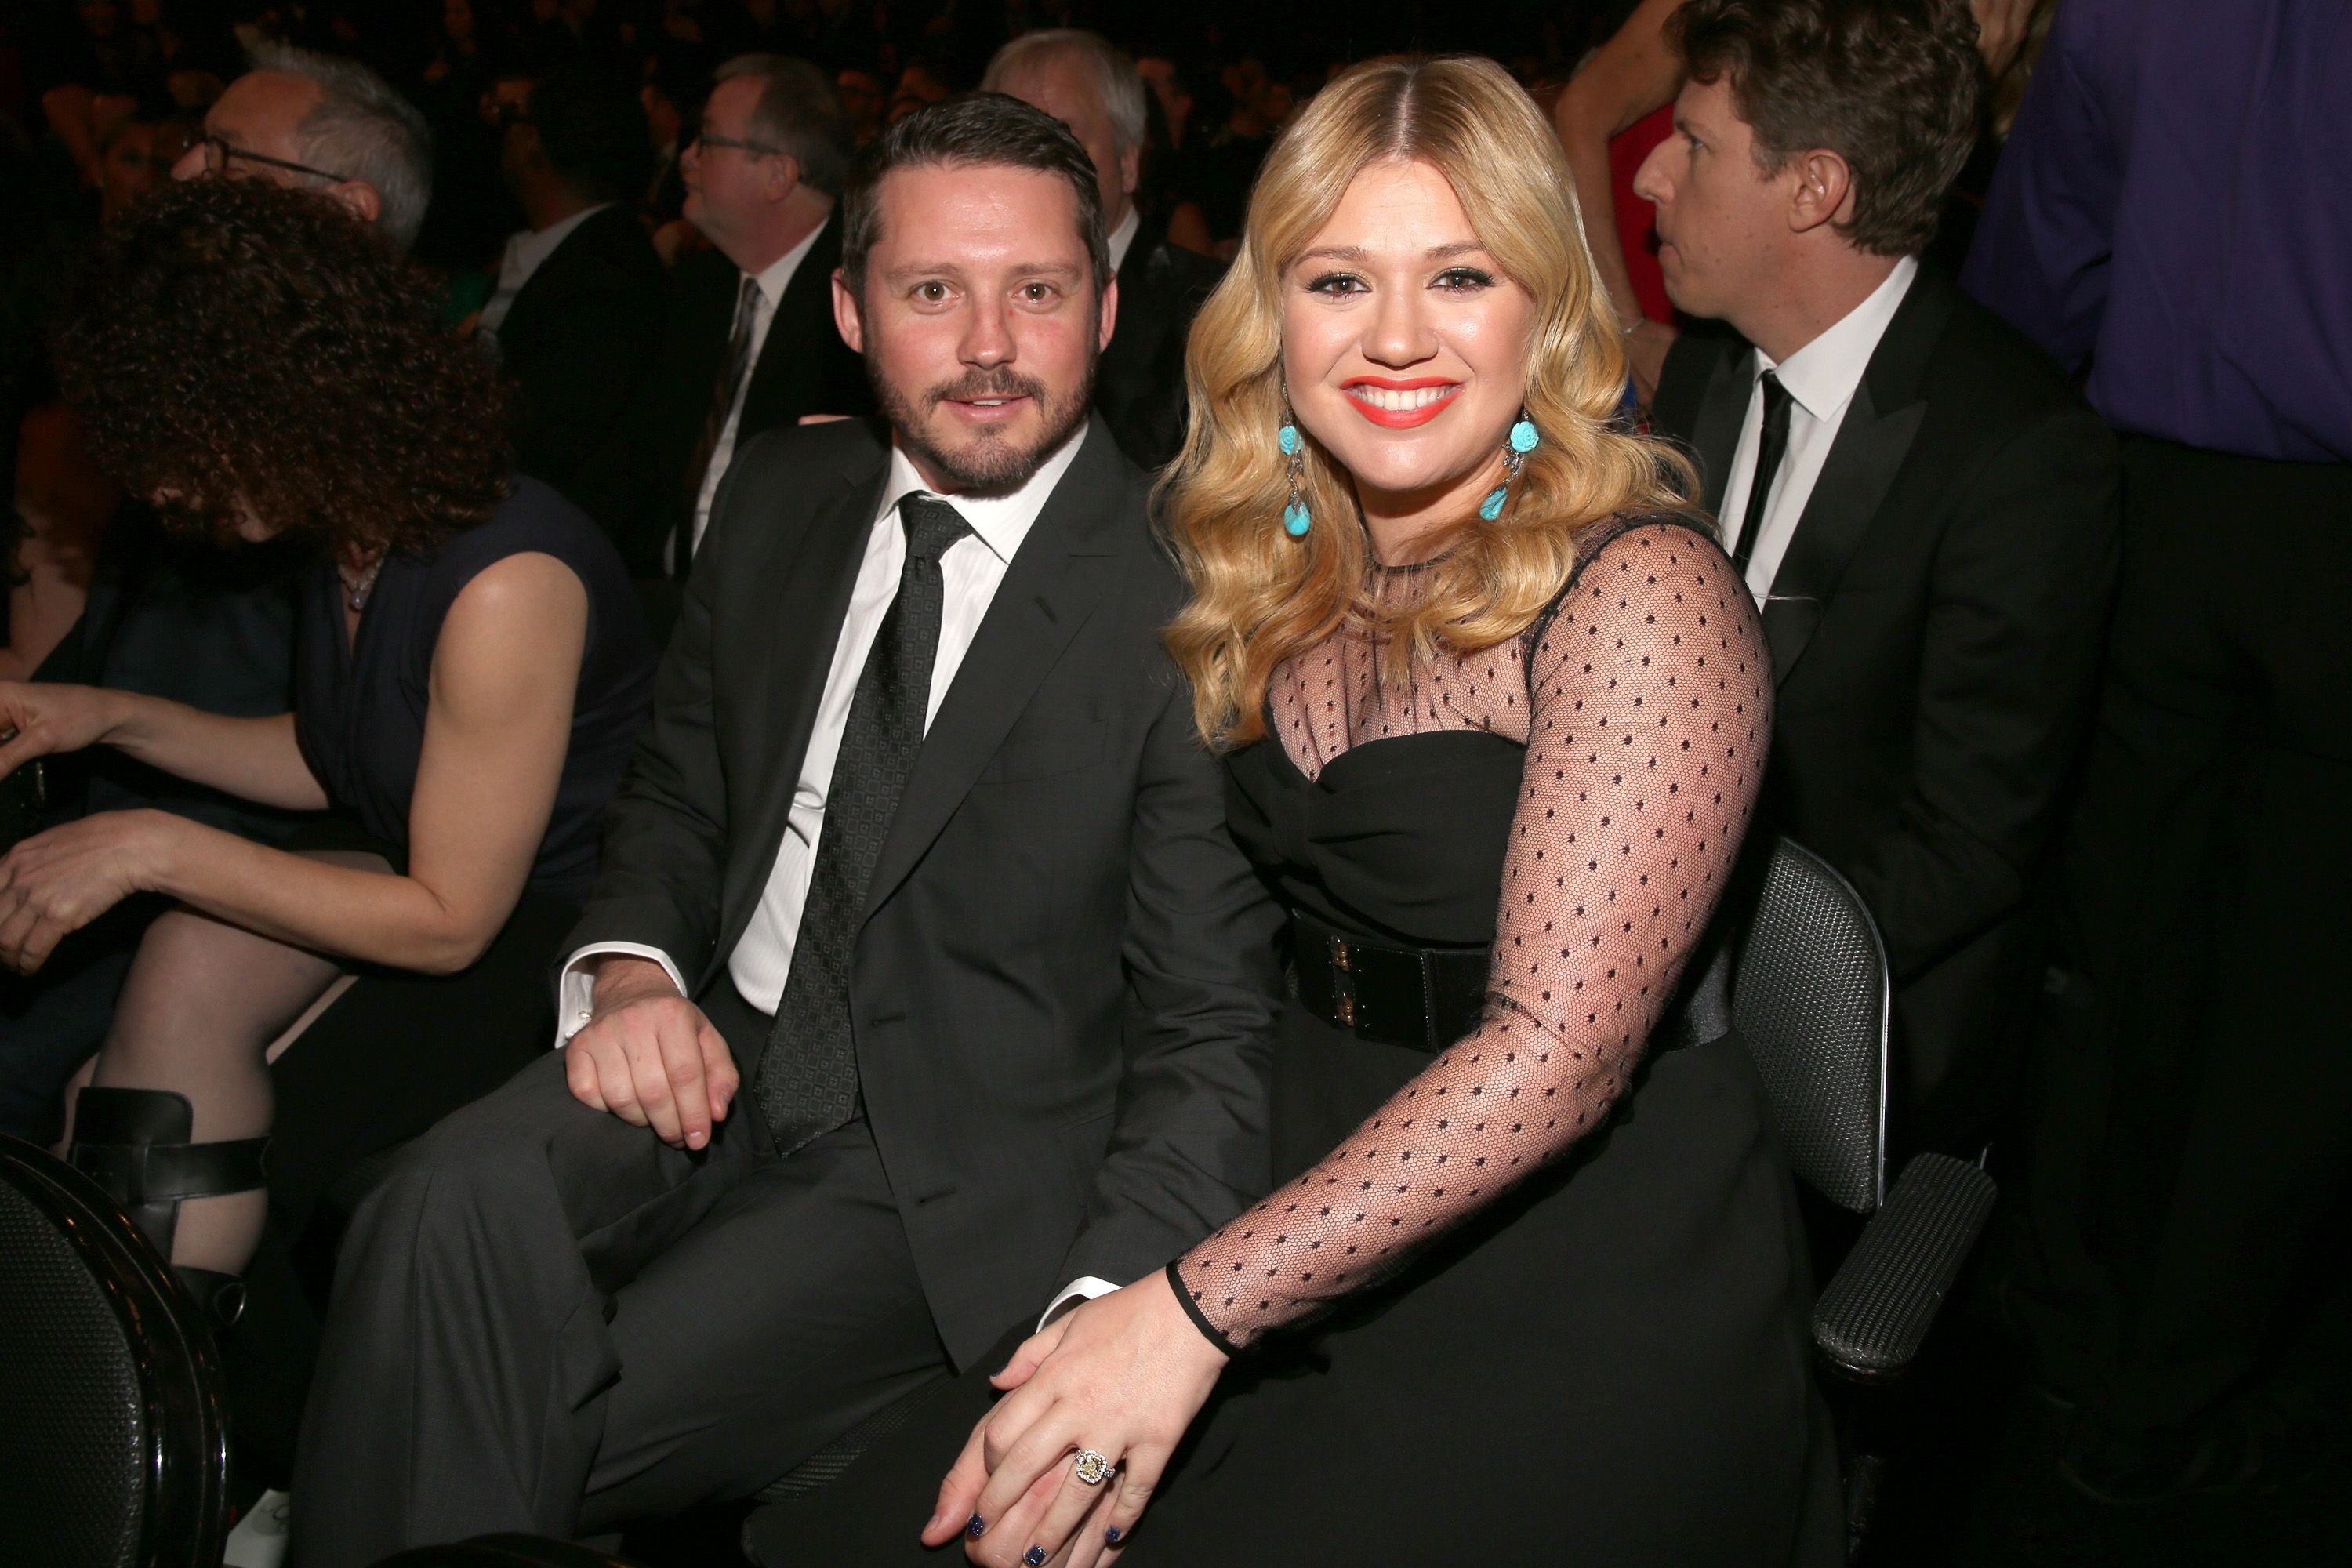 Kelly Clarkson and Brandon Blackstock at the 55th Annual GRAMMY Awards on February 10, 2013 | Photo: Getty Images